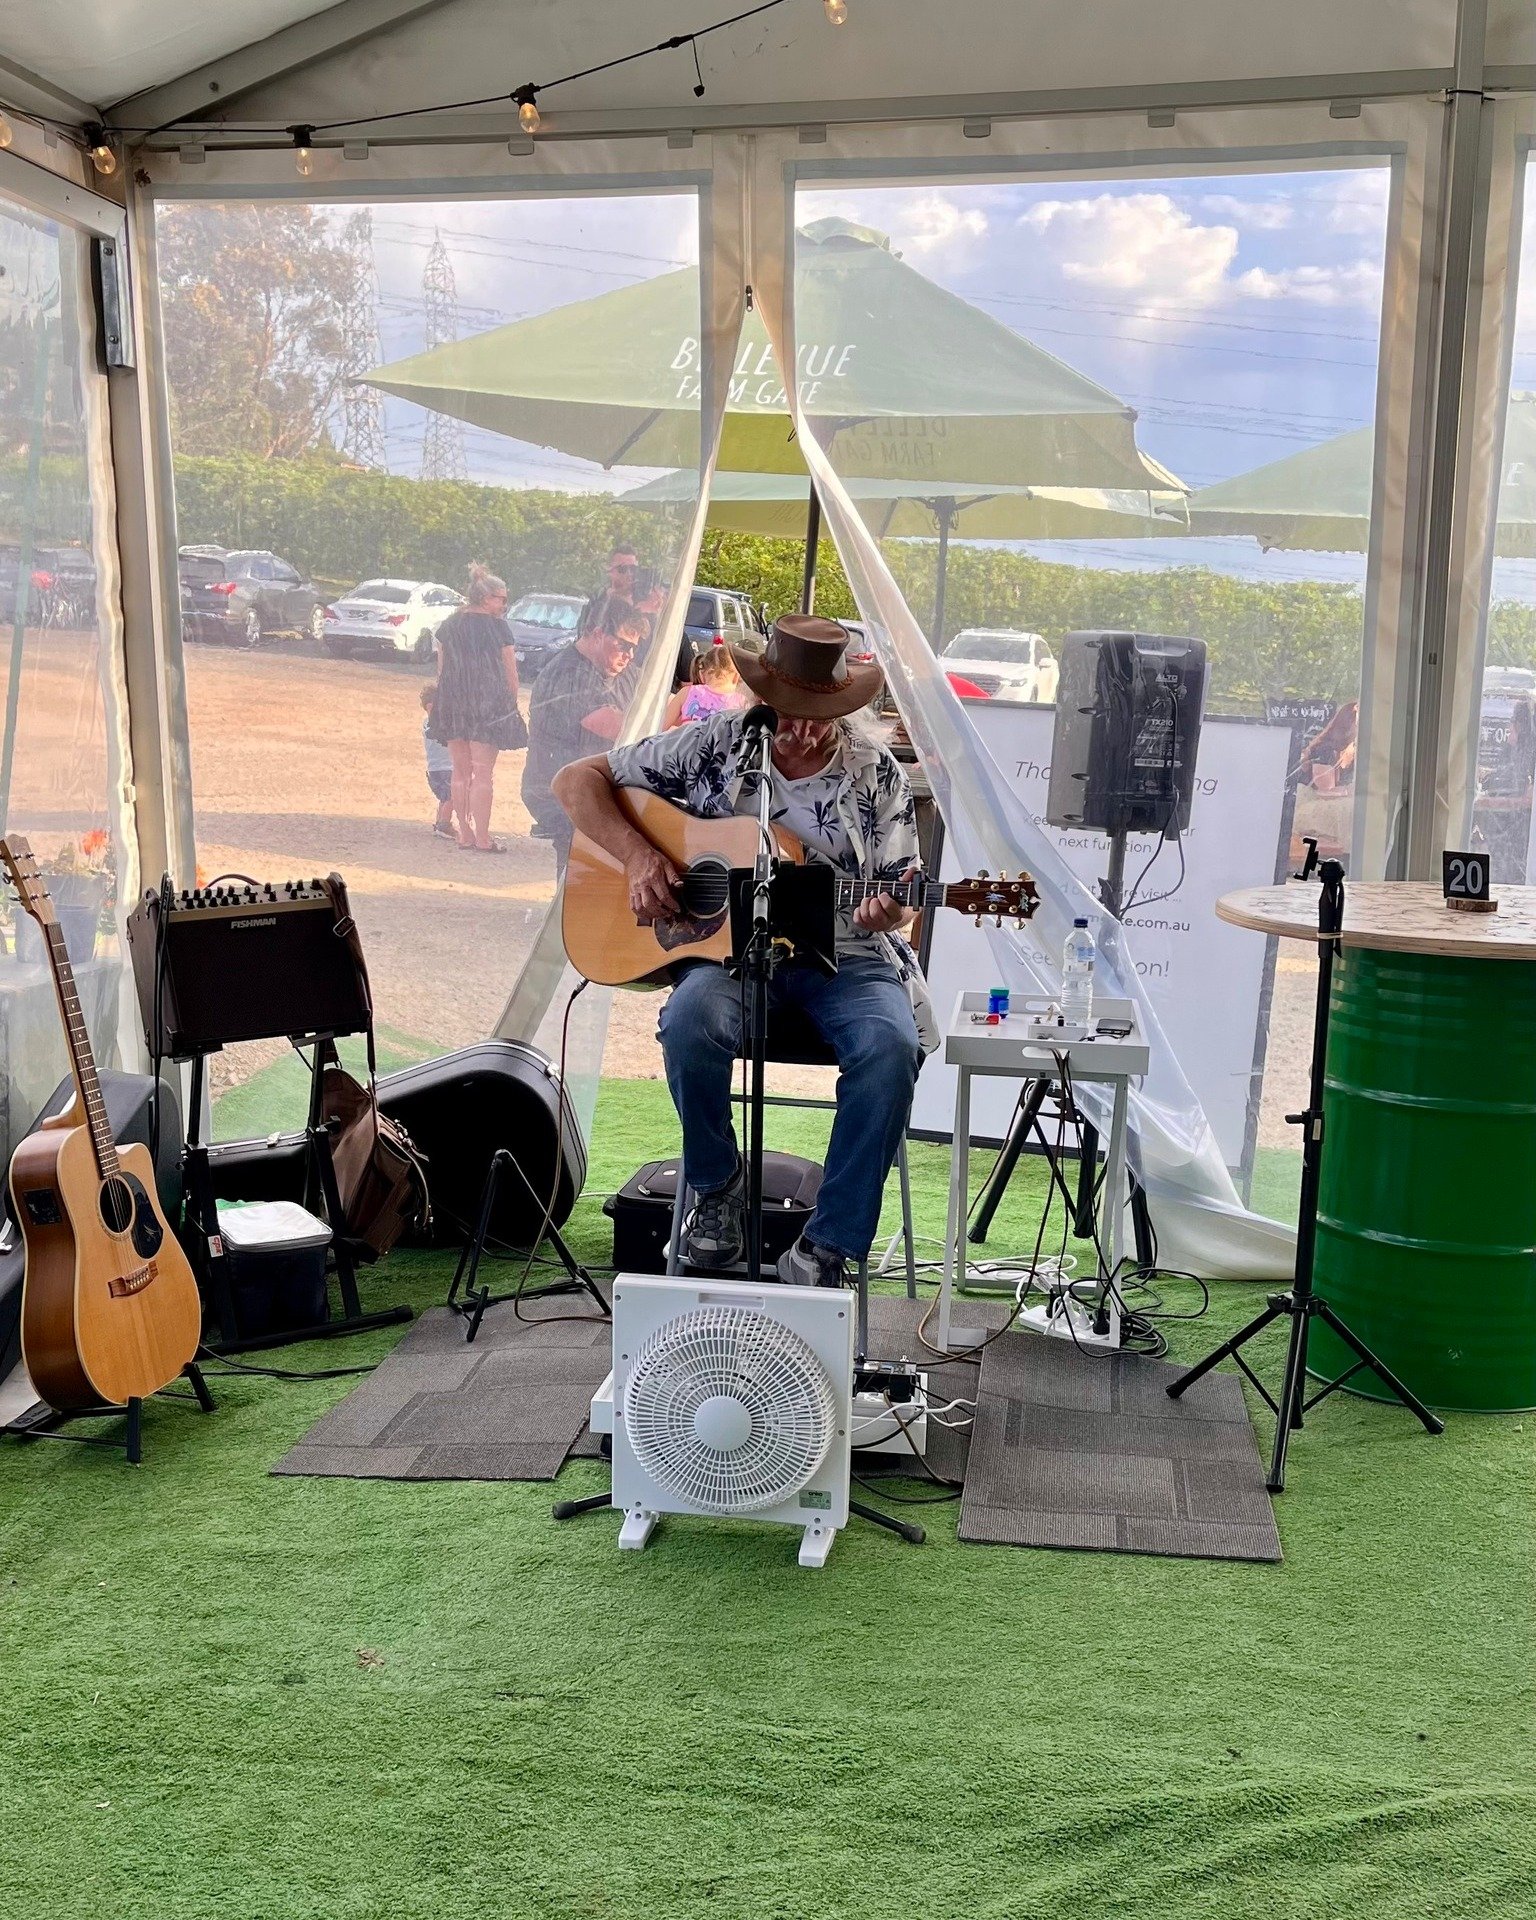 Mother's day is approaching... and fast !

We have locked in Ron and his Guitar Covers for all 3 sessions of the mothers day celebrations, we can't wait to jam out to some tunes from Ron 🎸🎶

We are running high tea and Devonshire tea across 3 sessi